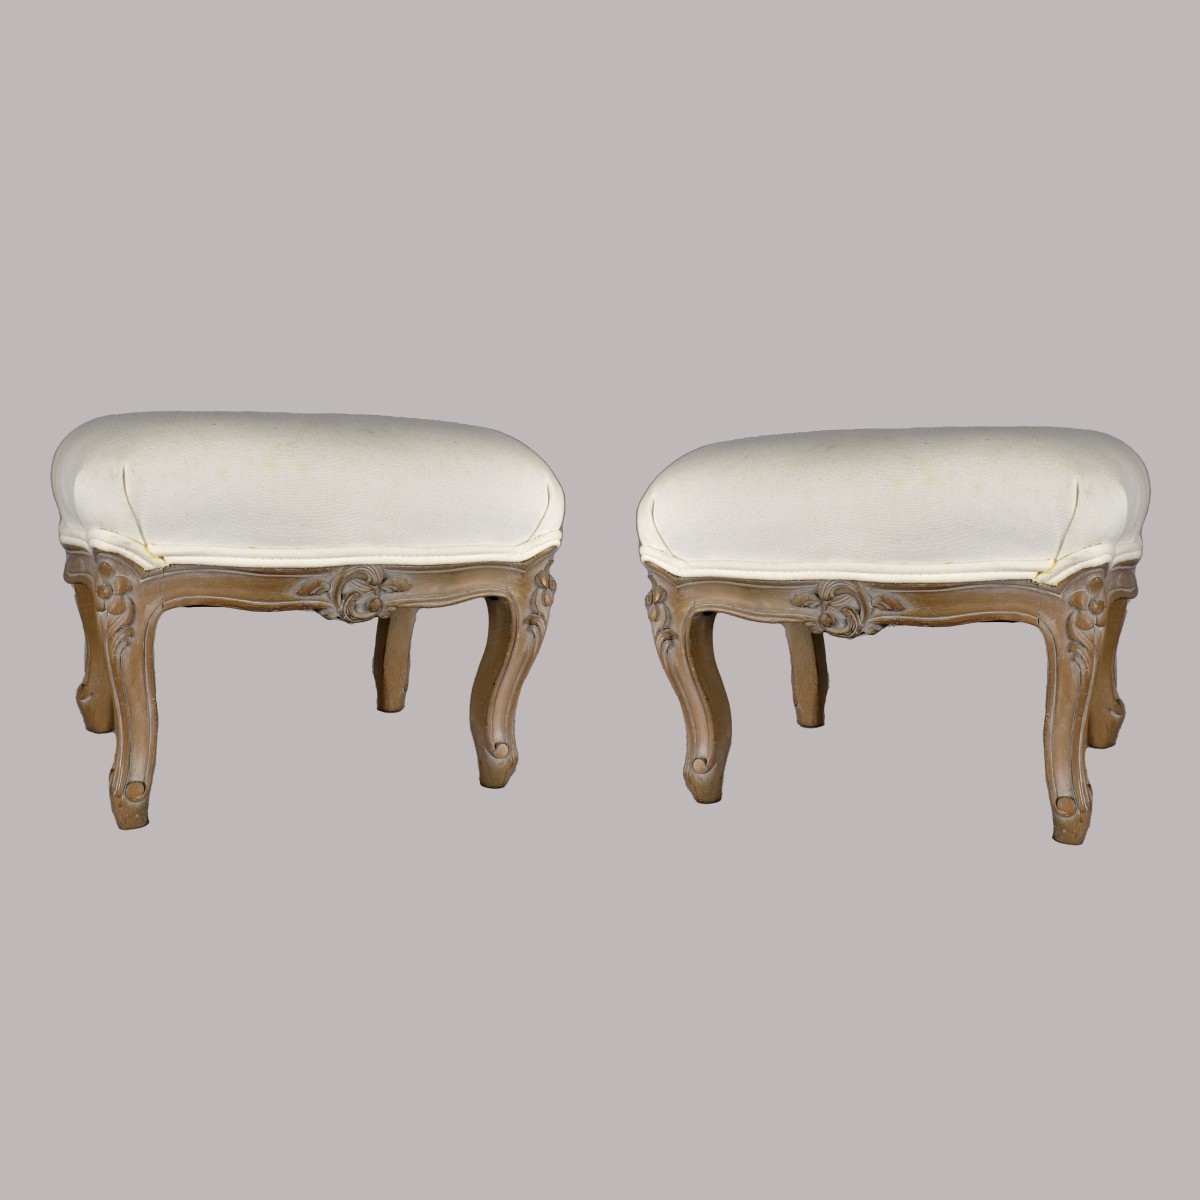 Pair of Victorian Style Foot Stools